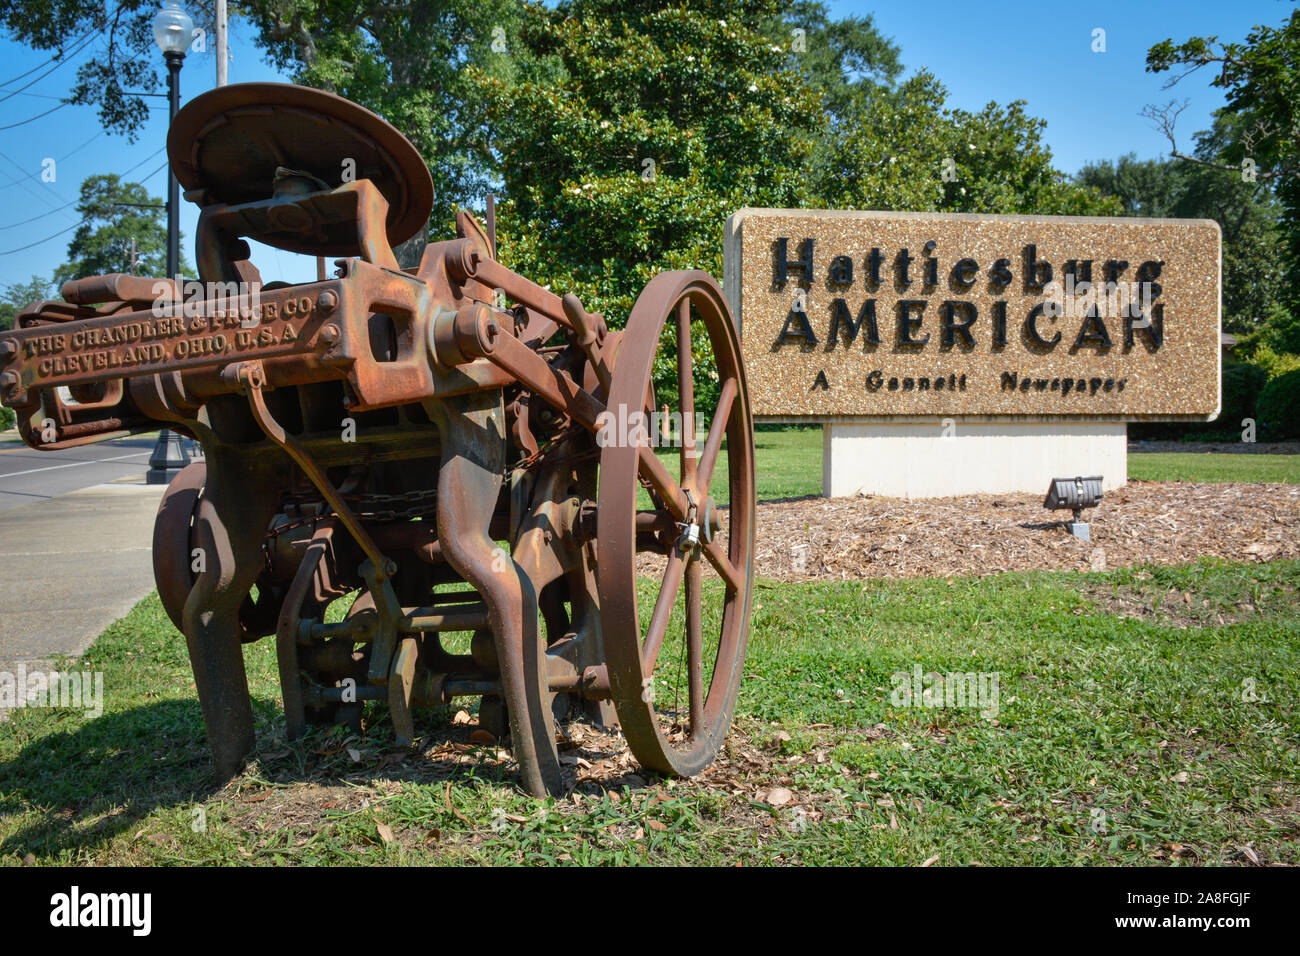 A sign for the Hattiesburg American, a Gannett Newspaper, along with a  rusty, antique printing machine are displayed in Hattiesburg, MS, USA Stock Photo